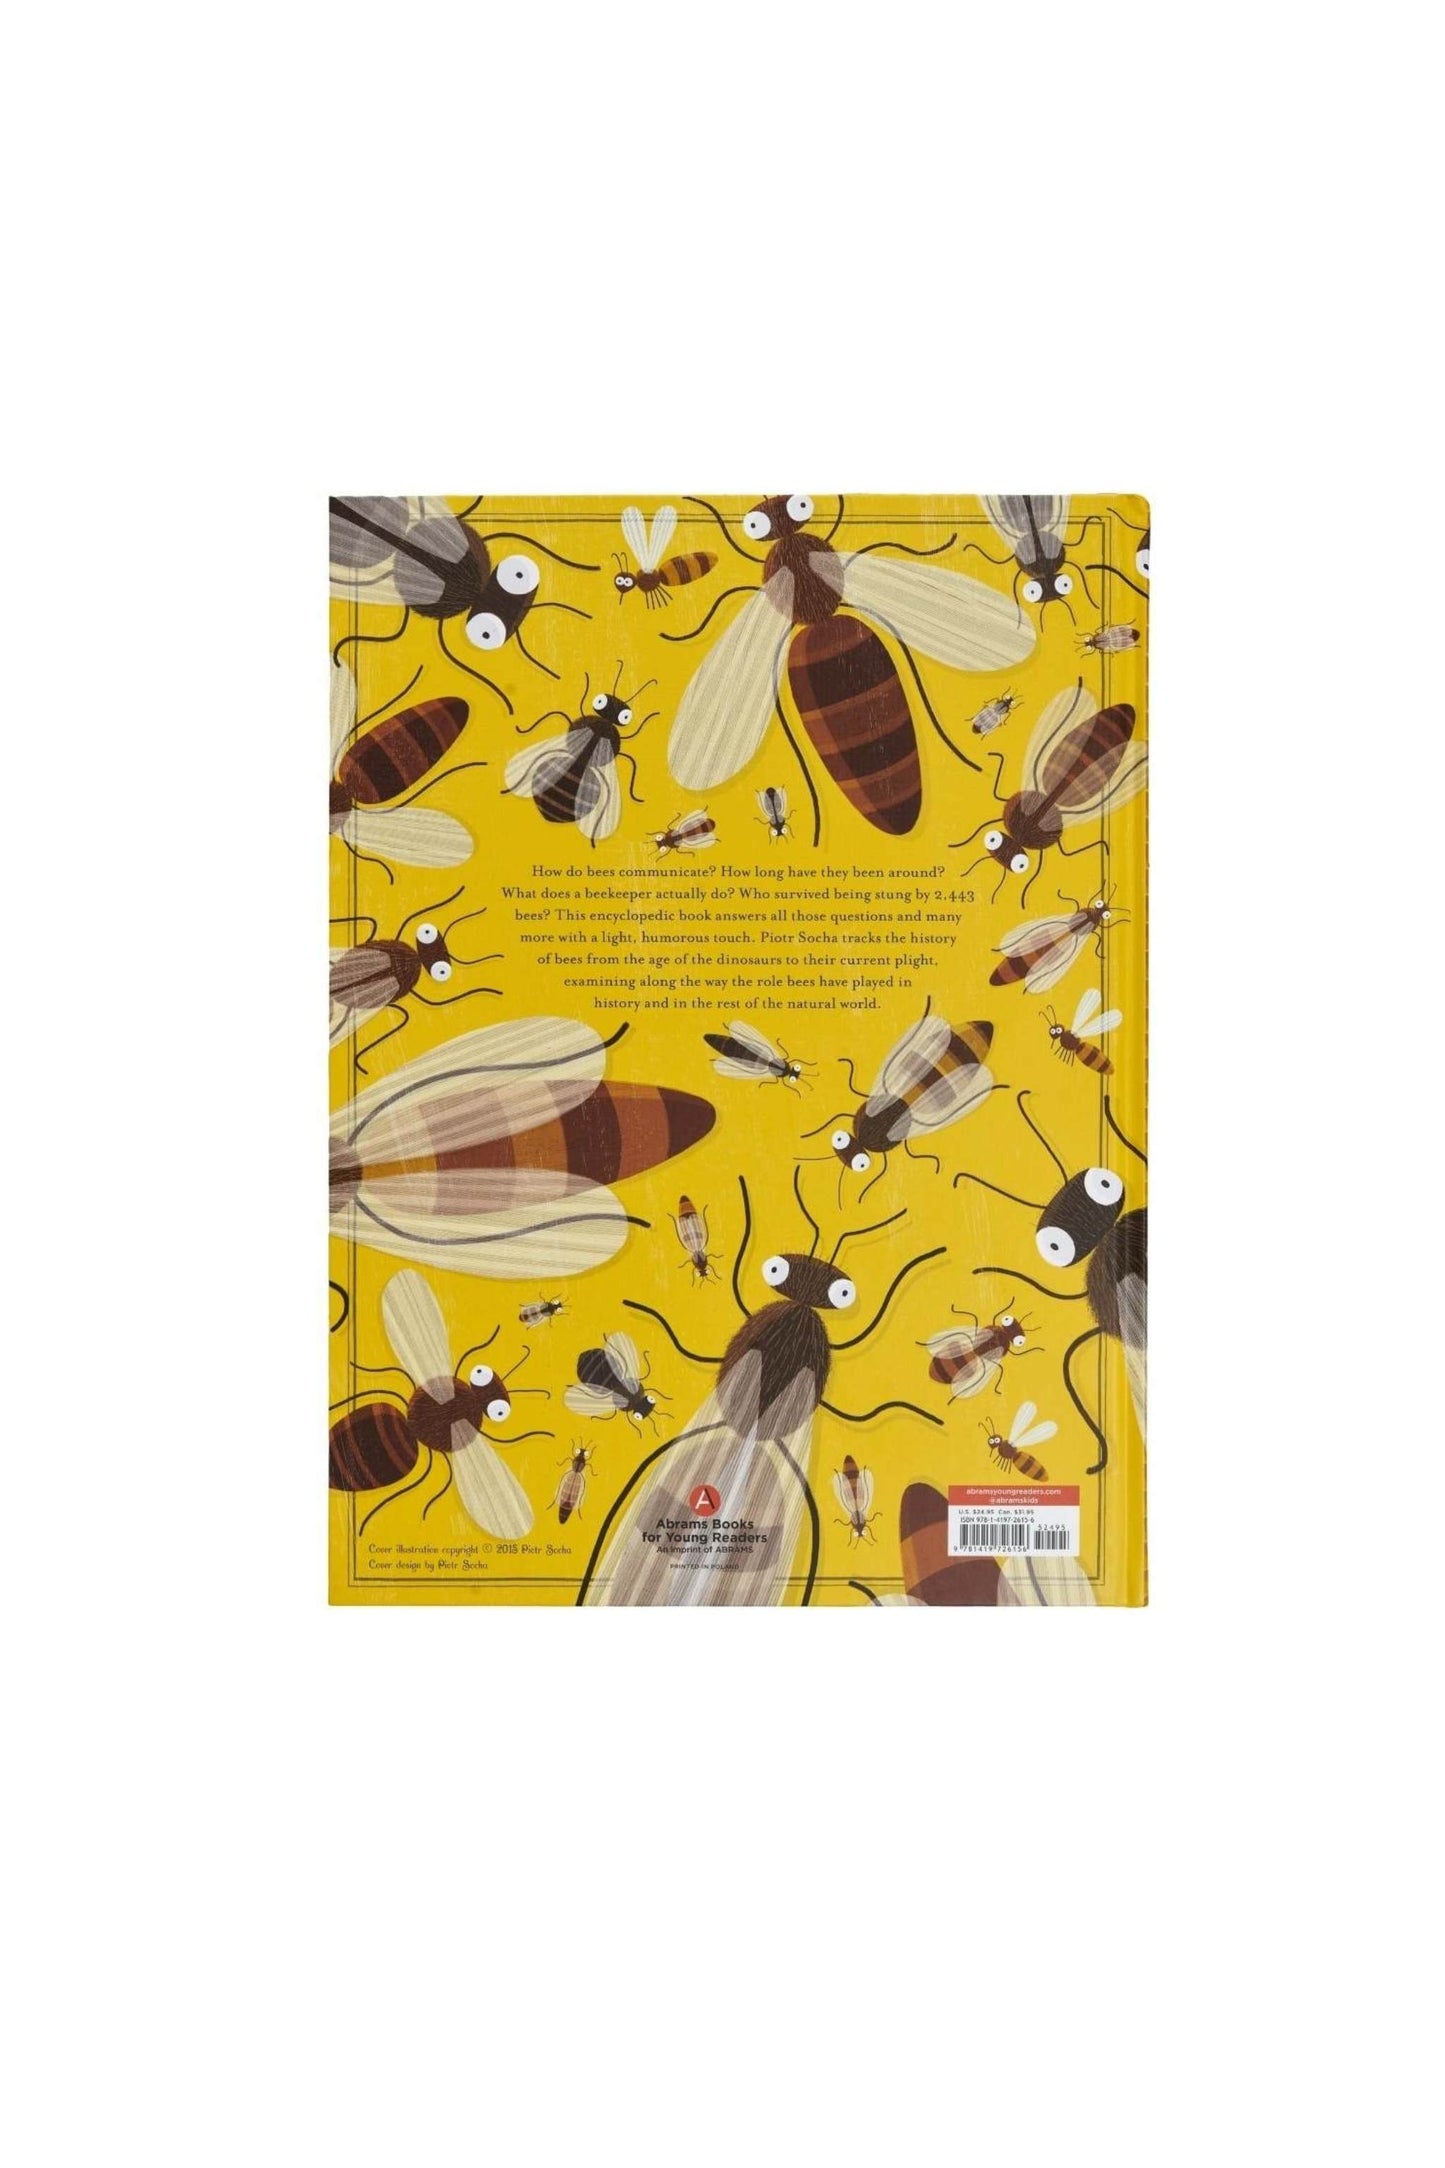 The back of a honey History about Bees, children book. Hardback book, yellow background covered in cartoon bees.